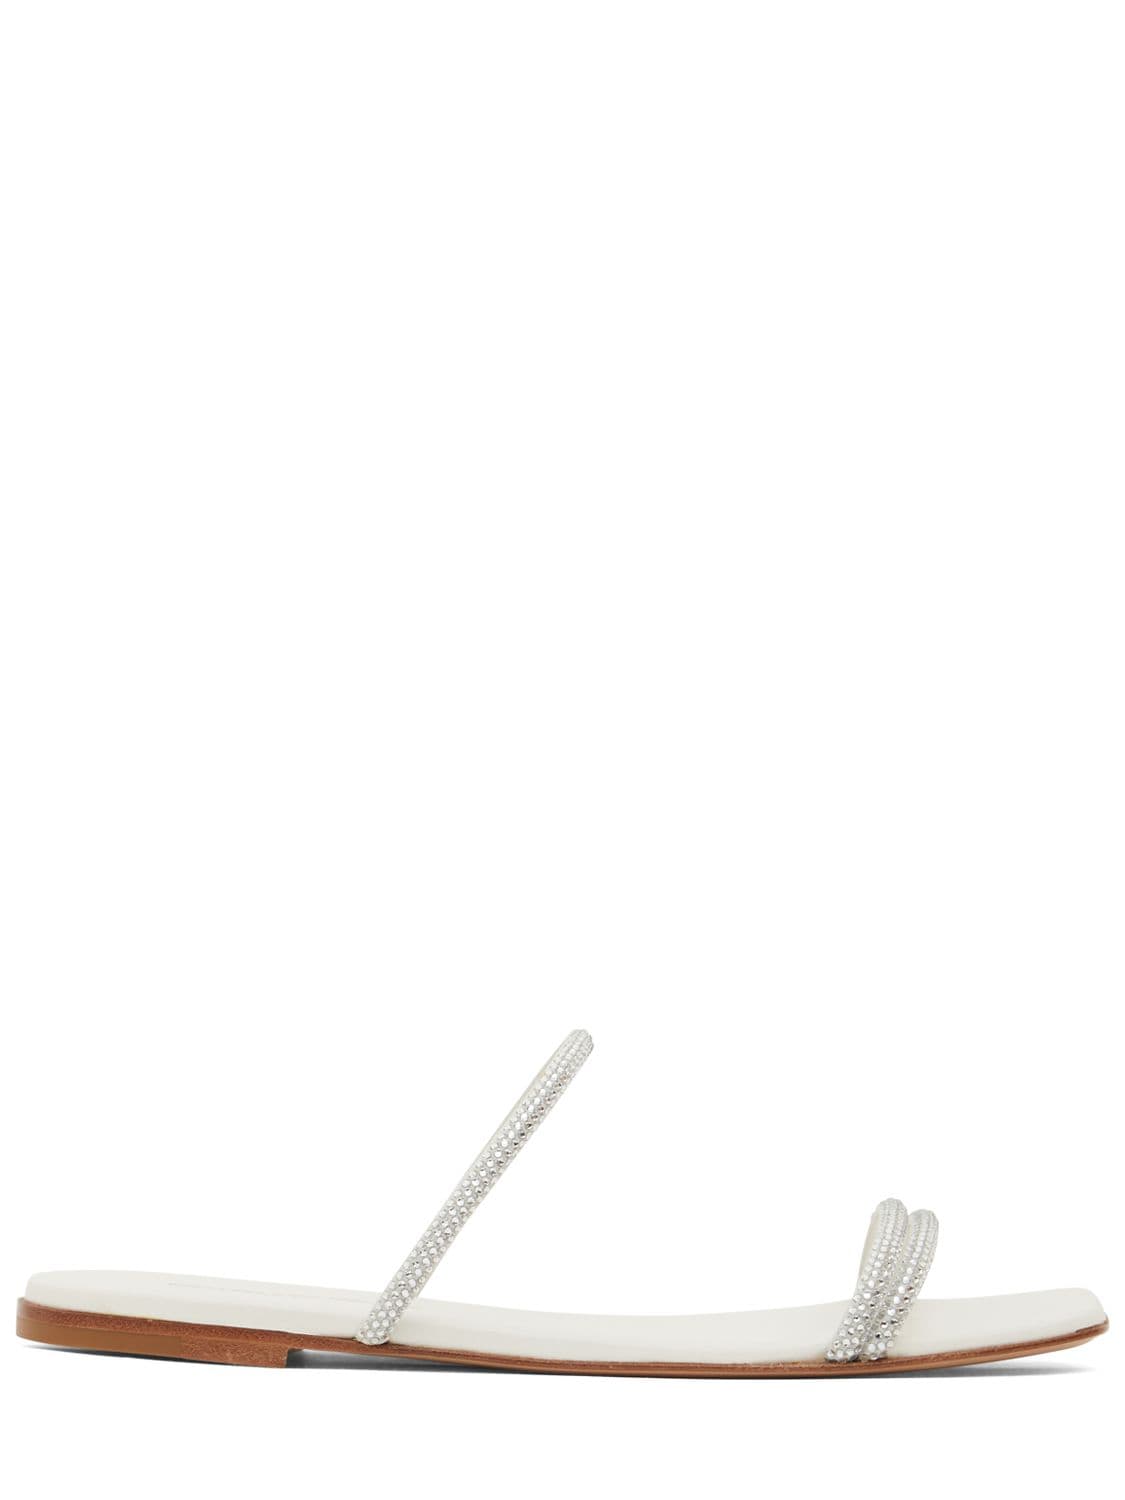 Shop Gianvito Rossi 10mm Cannes Flat Sandals W/crystals In White